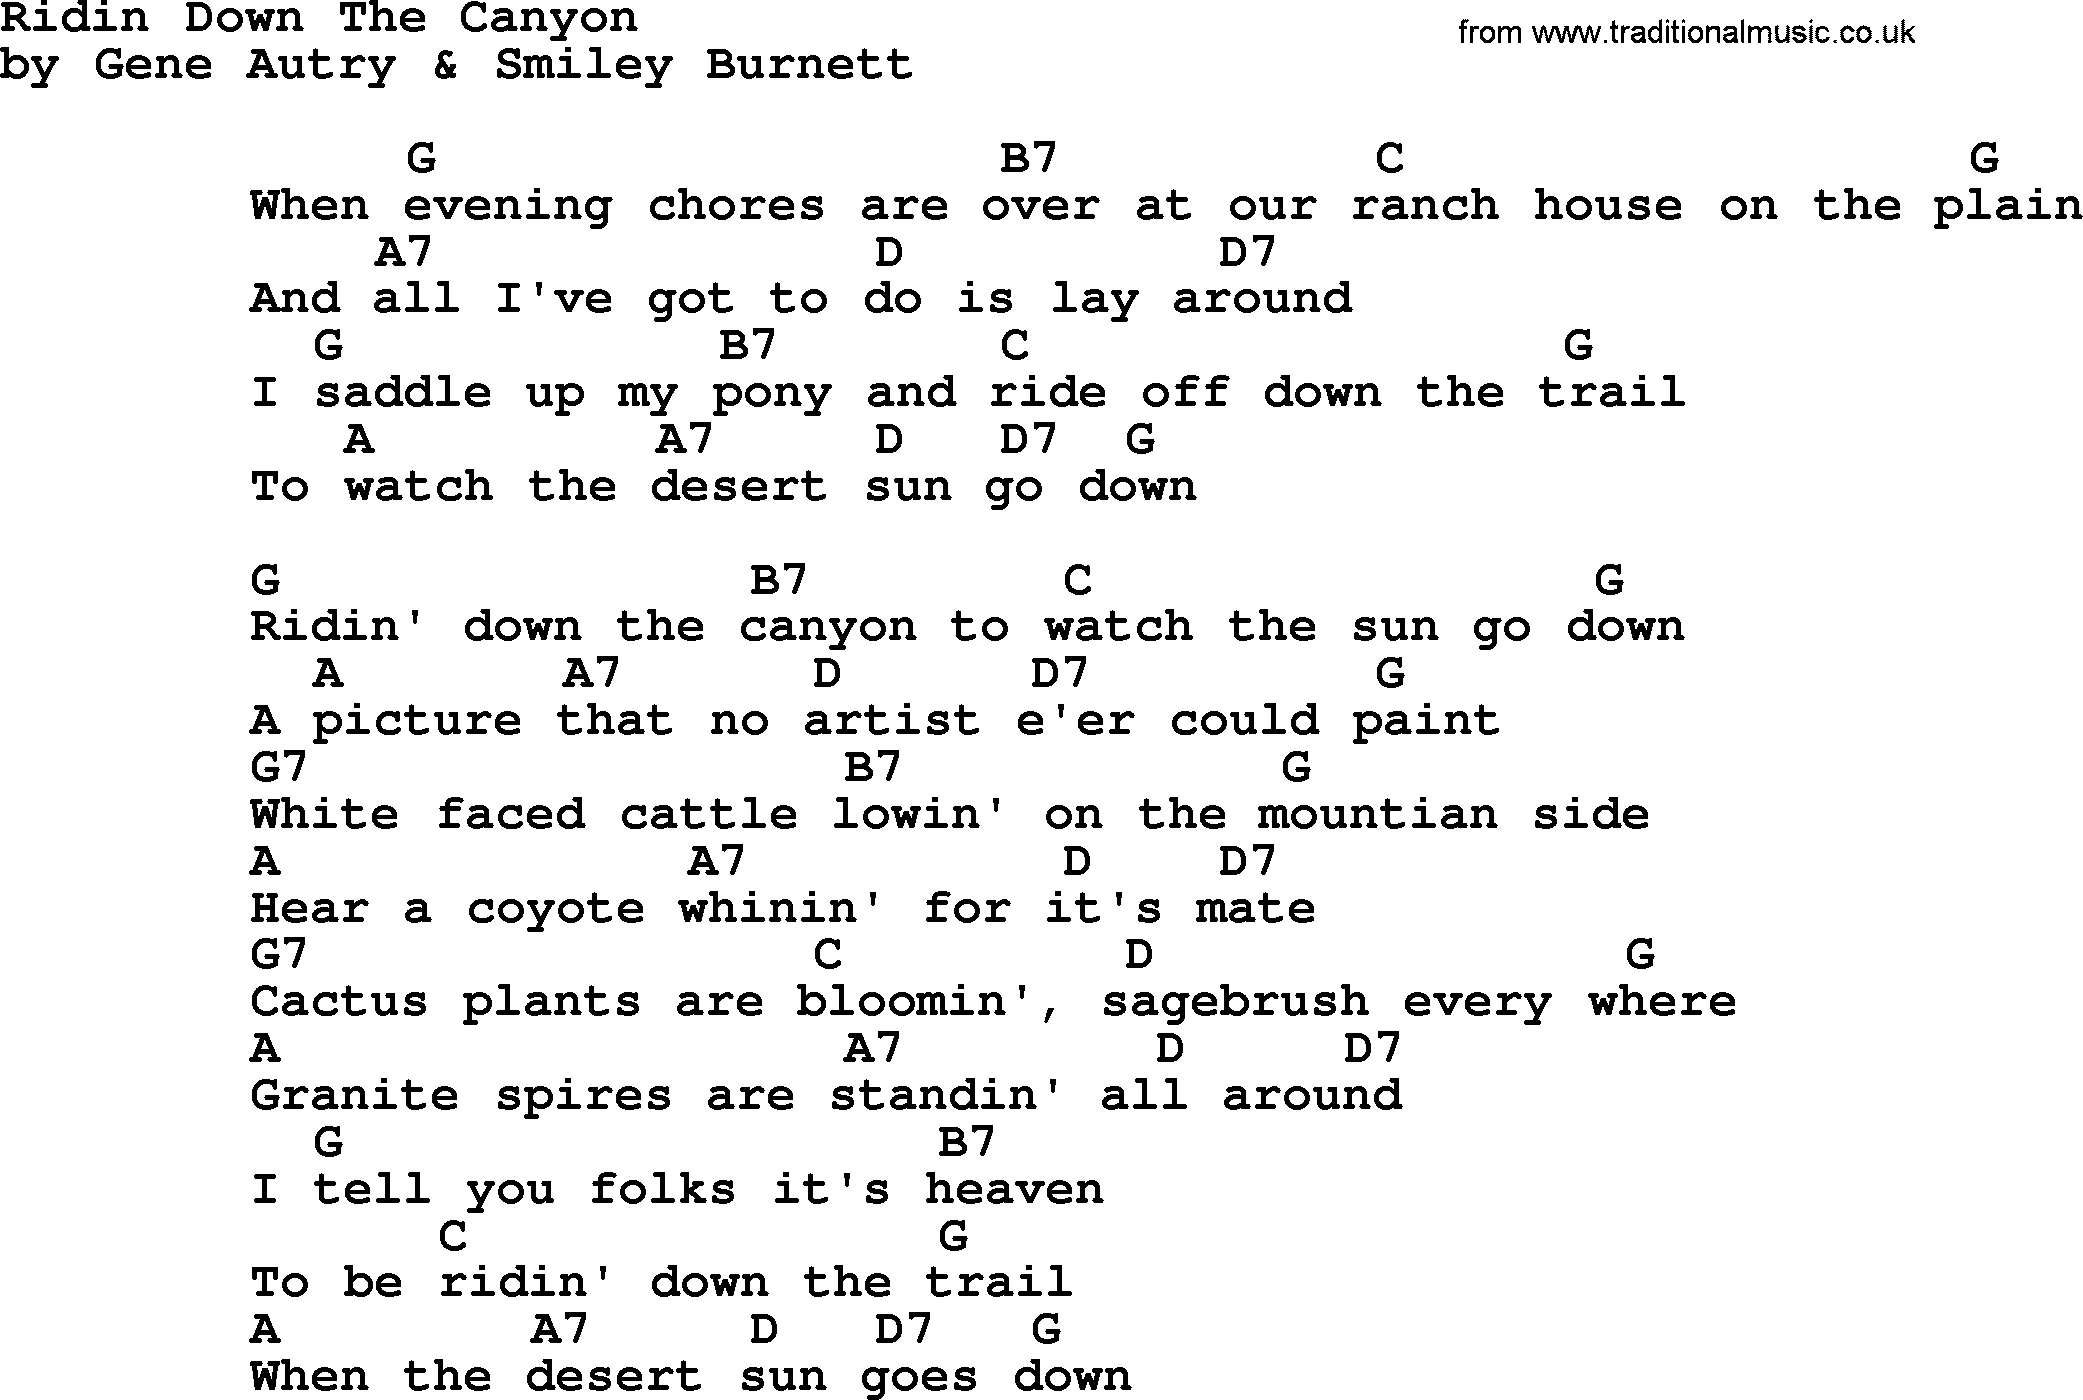 Bluegrass song: Ridin Down The Canyon, lyrics and chords